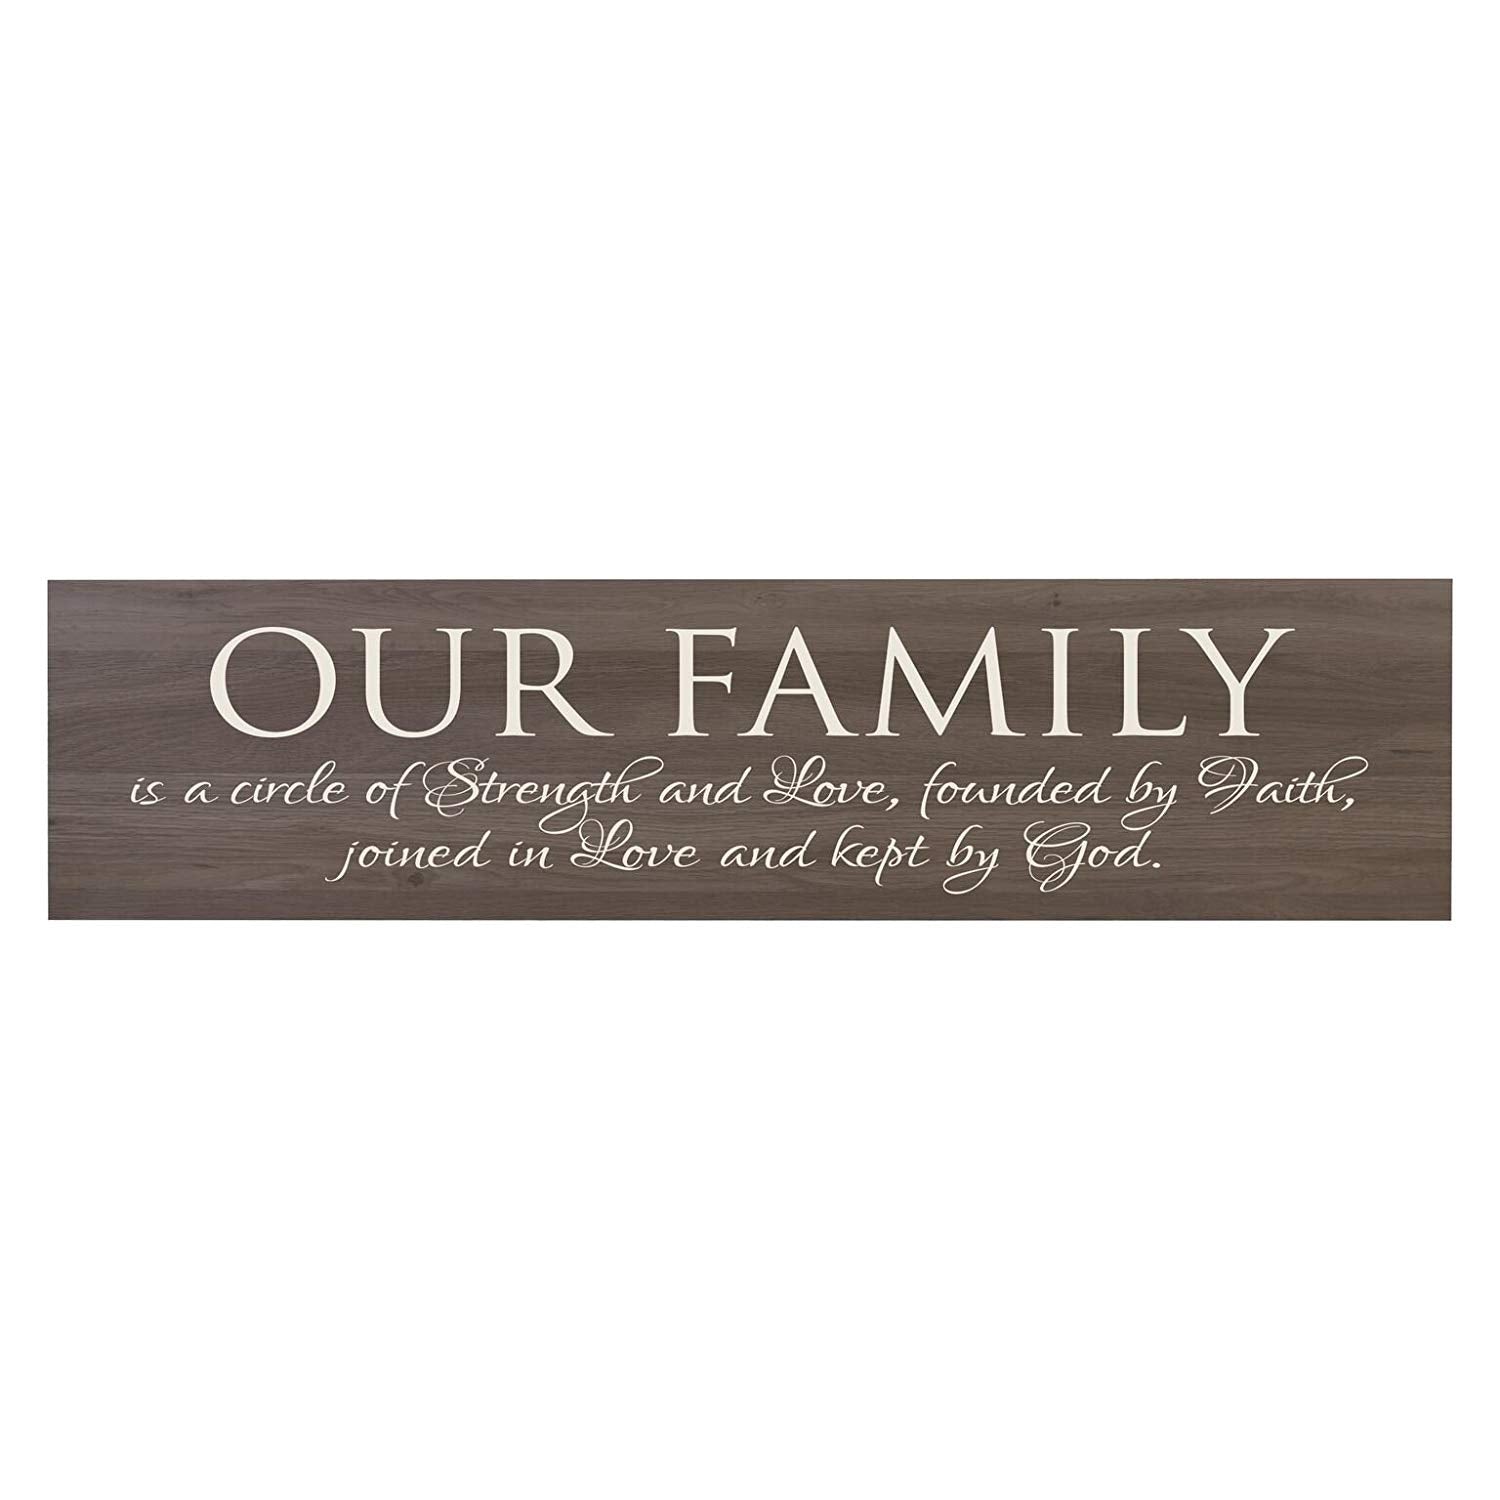 Our Family Is A Circle of Strength Decorative Wall Sign - LifeSong Milestones